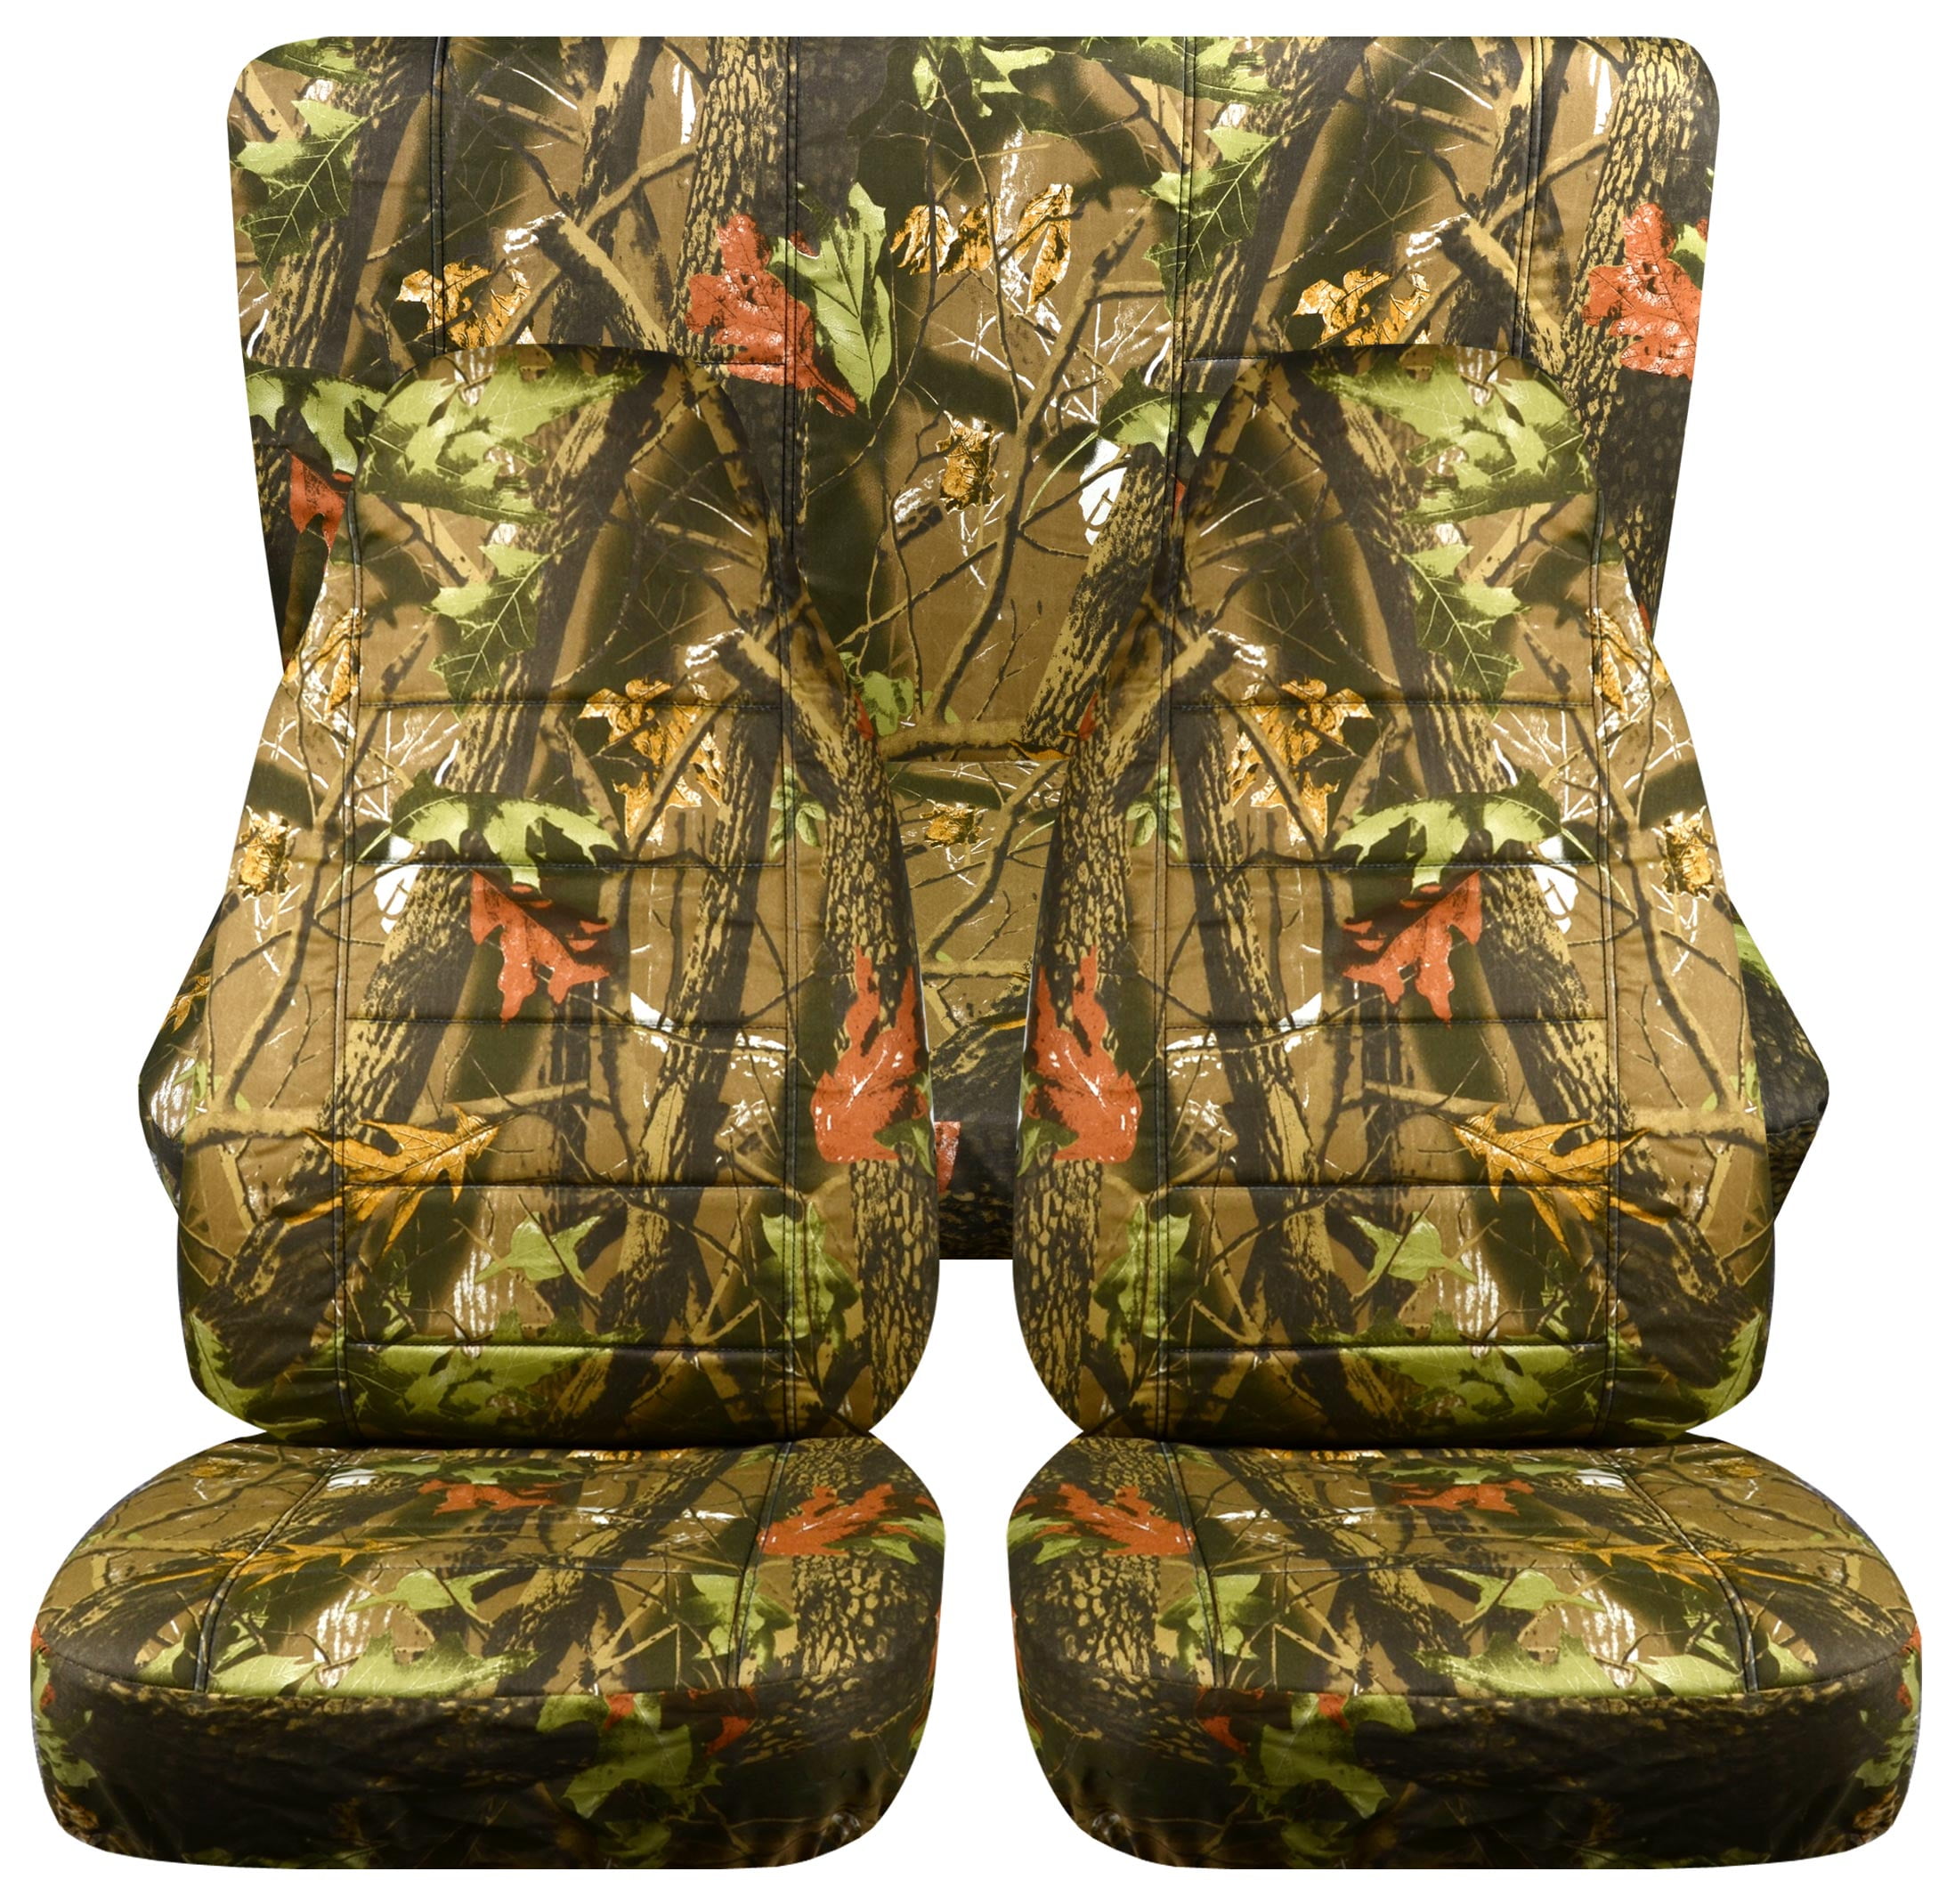 T308-Designcovers Compatible with 1997-2002 Jeep Wrangler TJ  SE/Sport/Sahara Camo 2door Seat Covers:Camo real Tree - Full Set Front&Rear  Front&Rear 